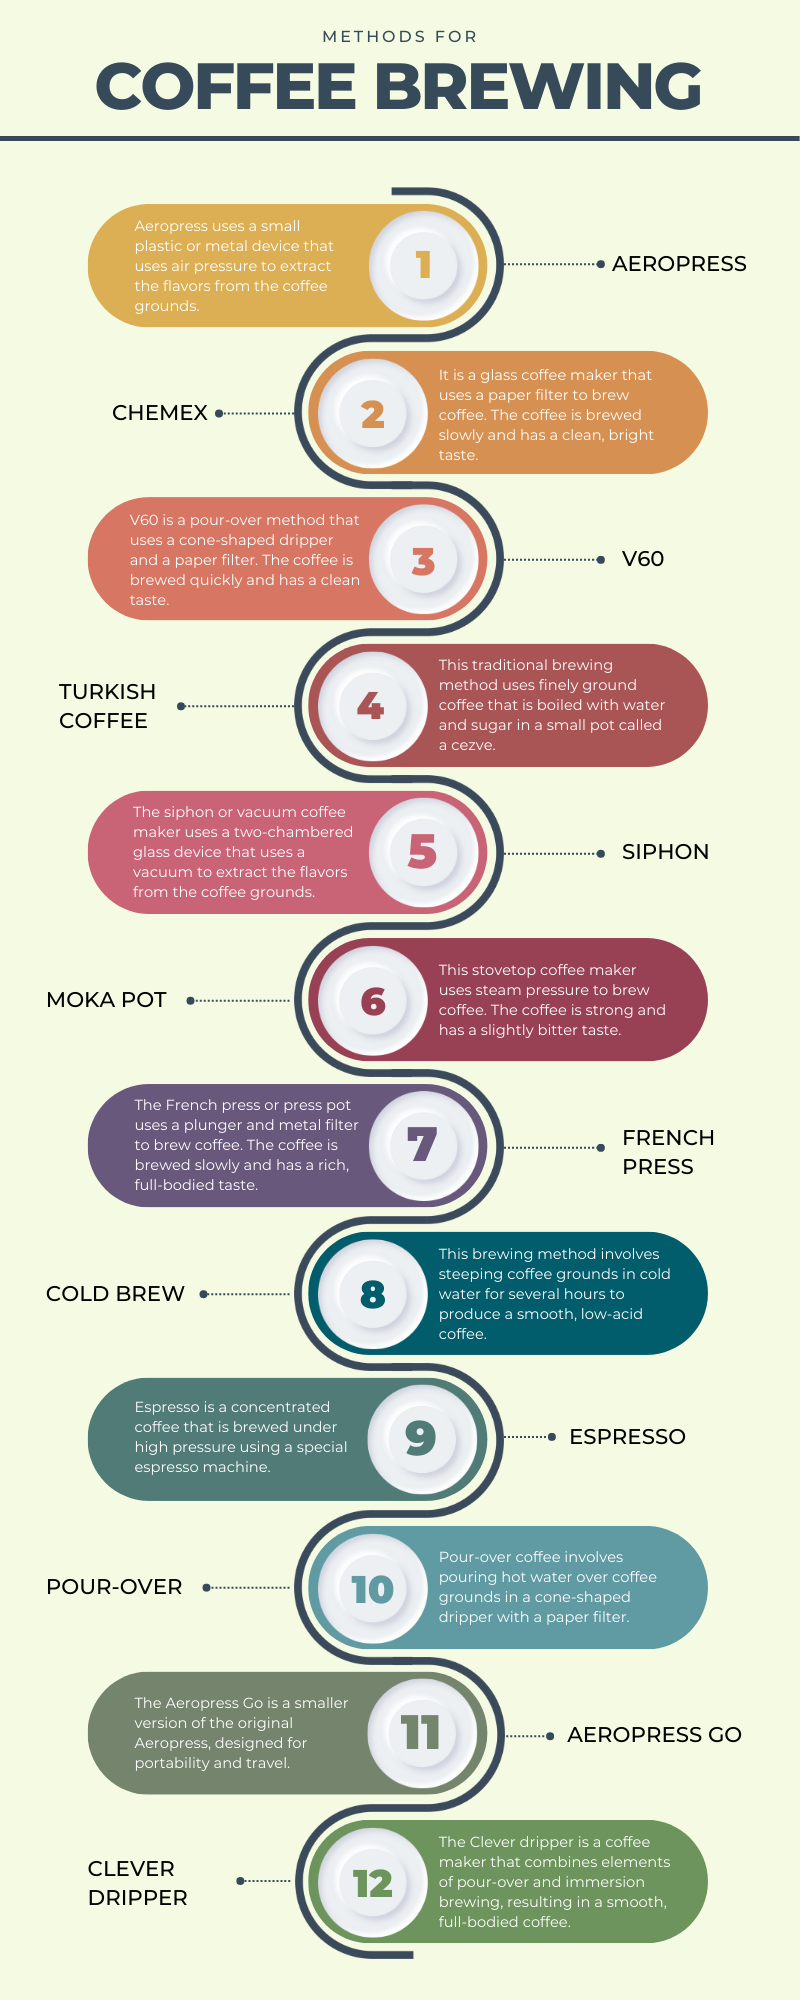 Methods for Coffee Brewing